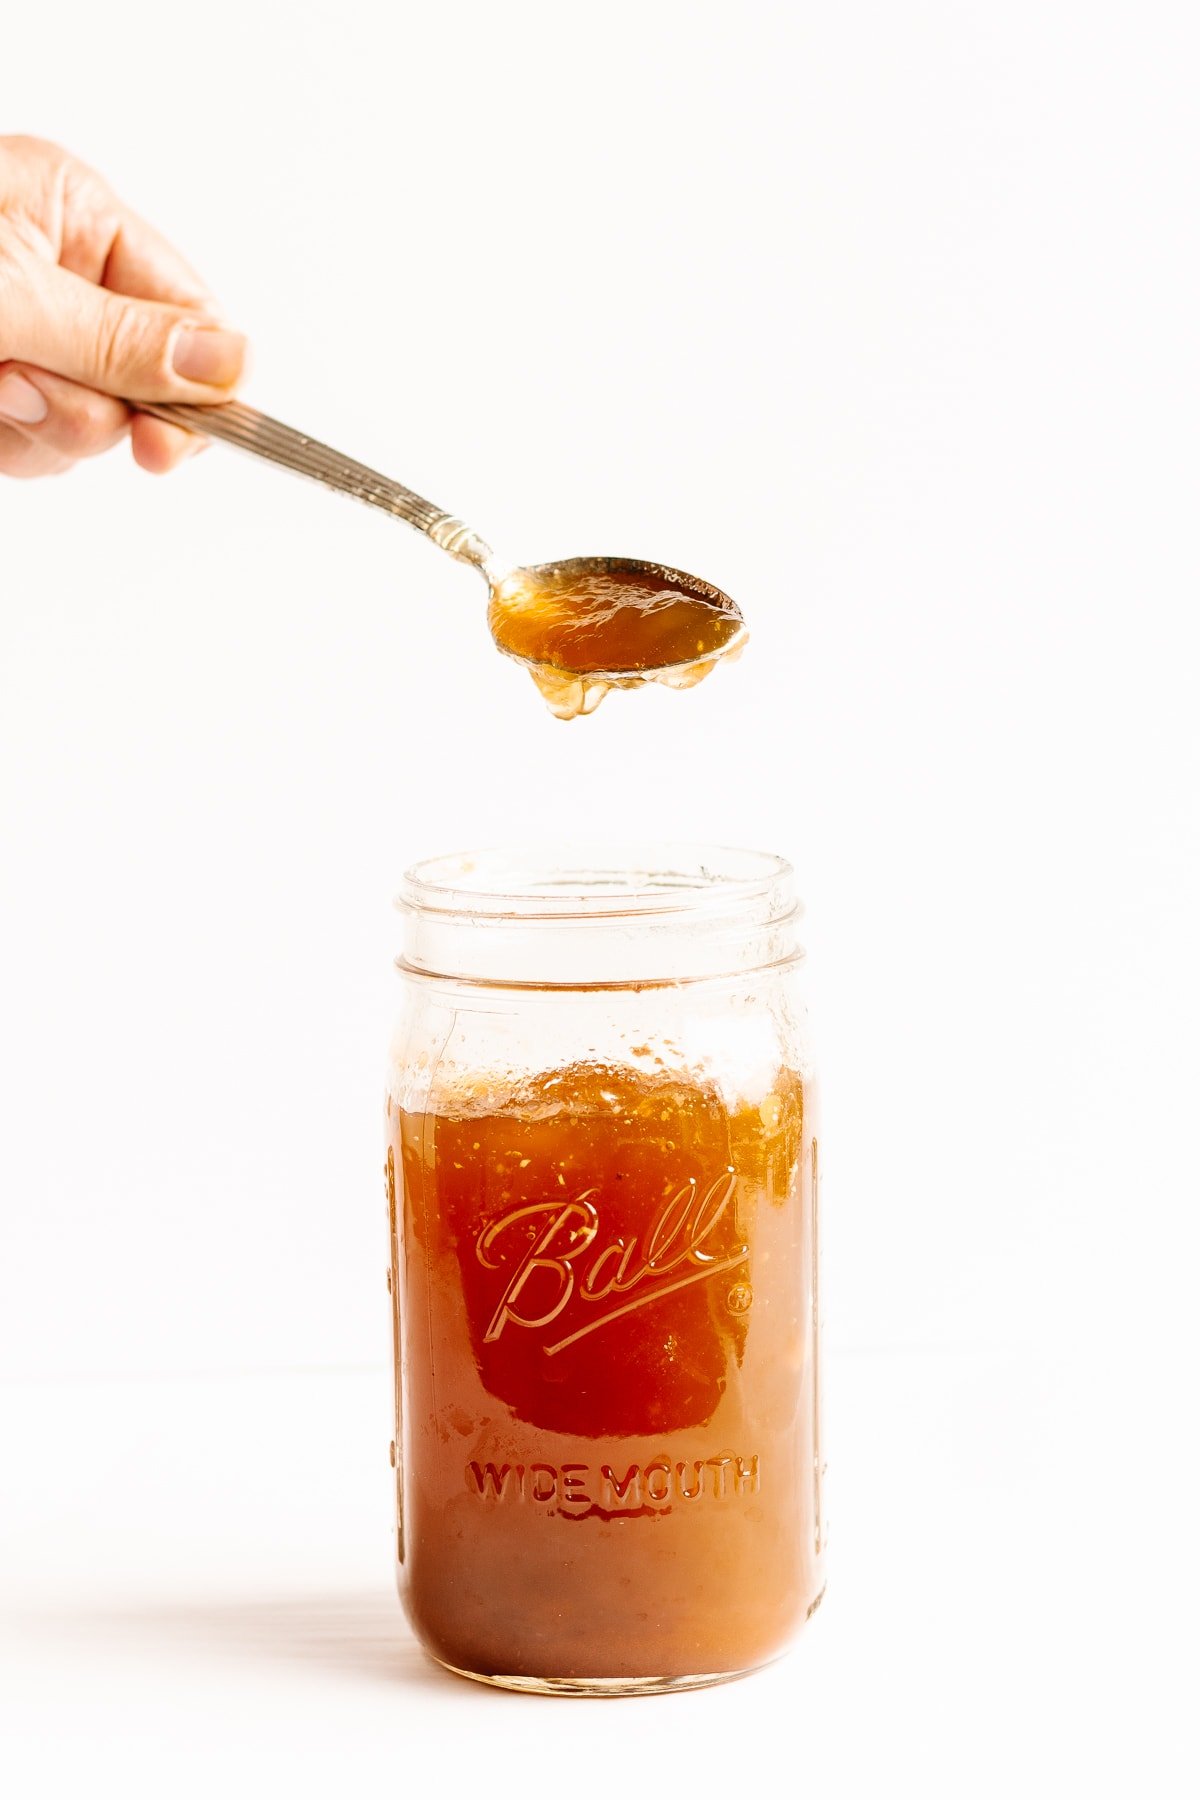 Hand holding spoon scooping out some chilled beef bone broth from a mason jar.